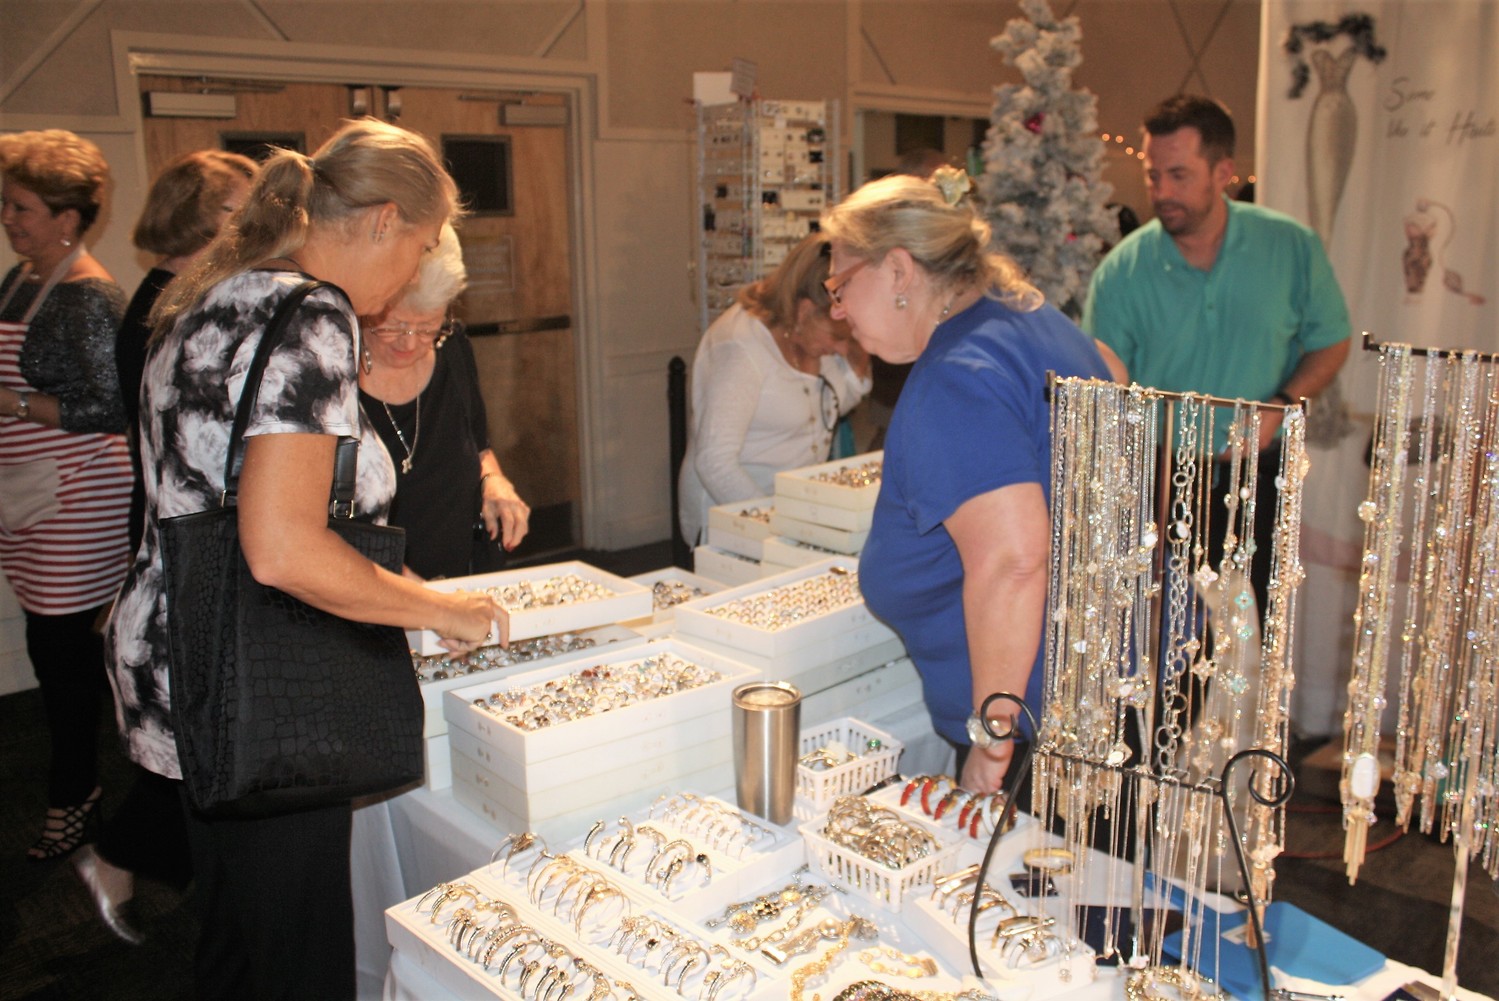 Customers look over the wares at Kathy's Accessories.